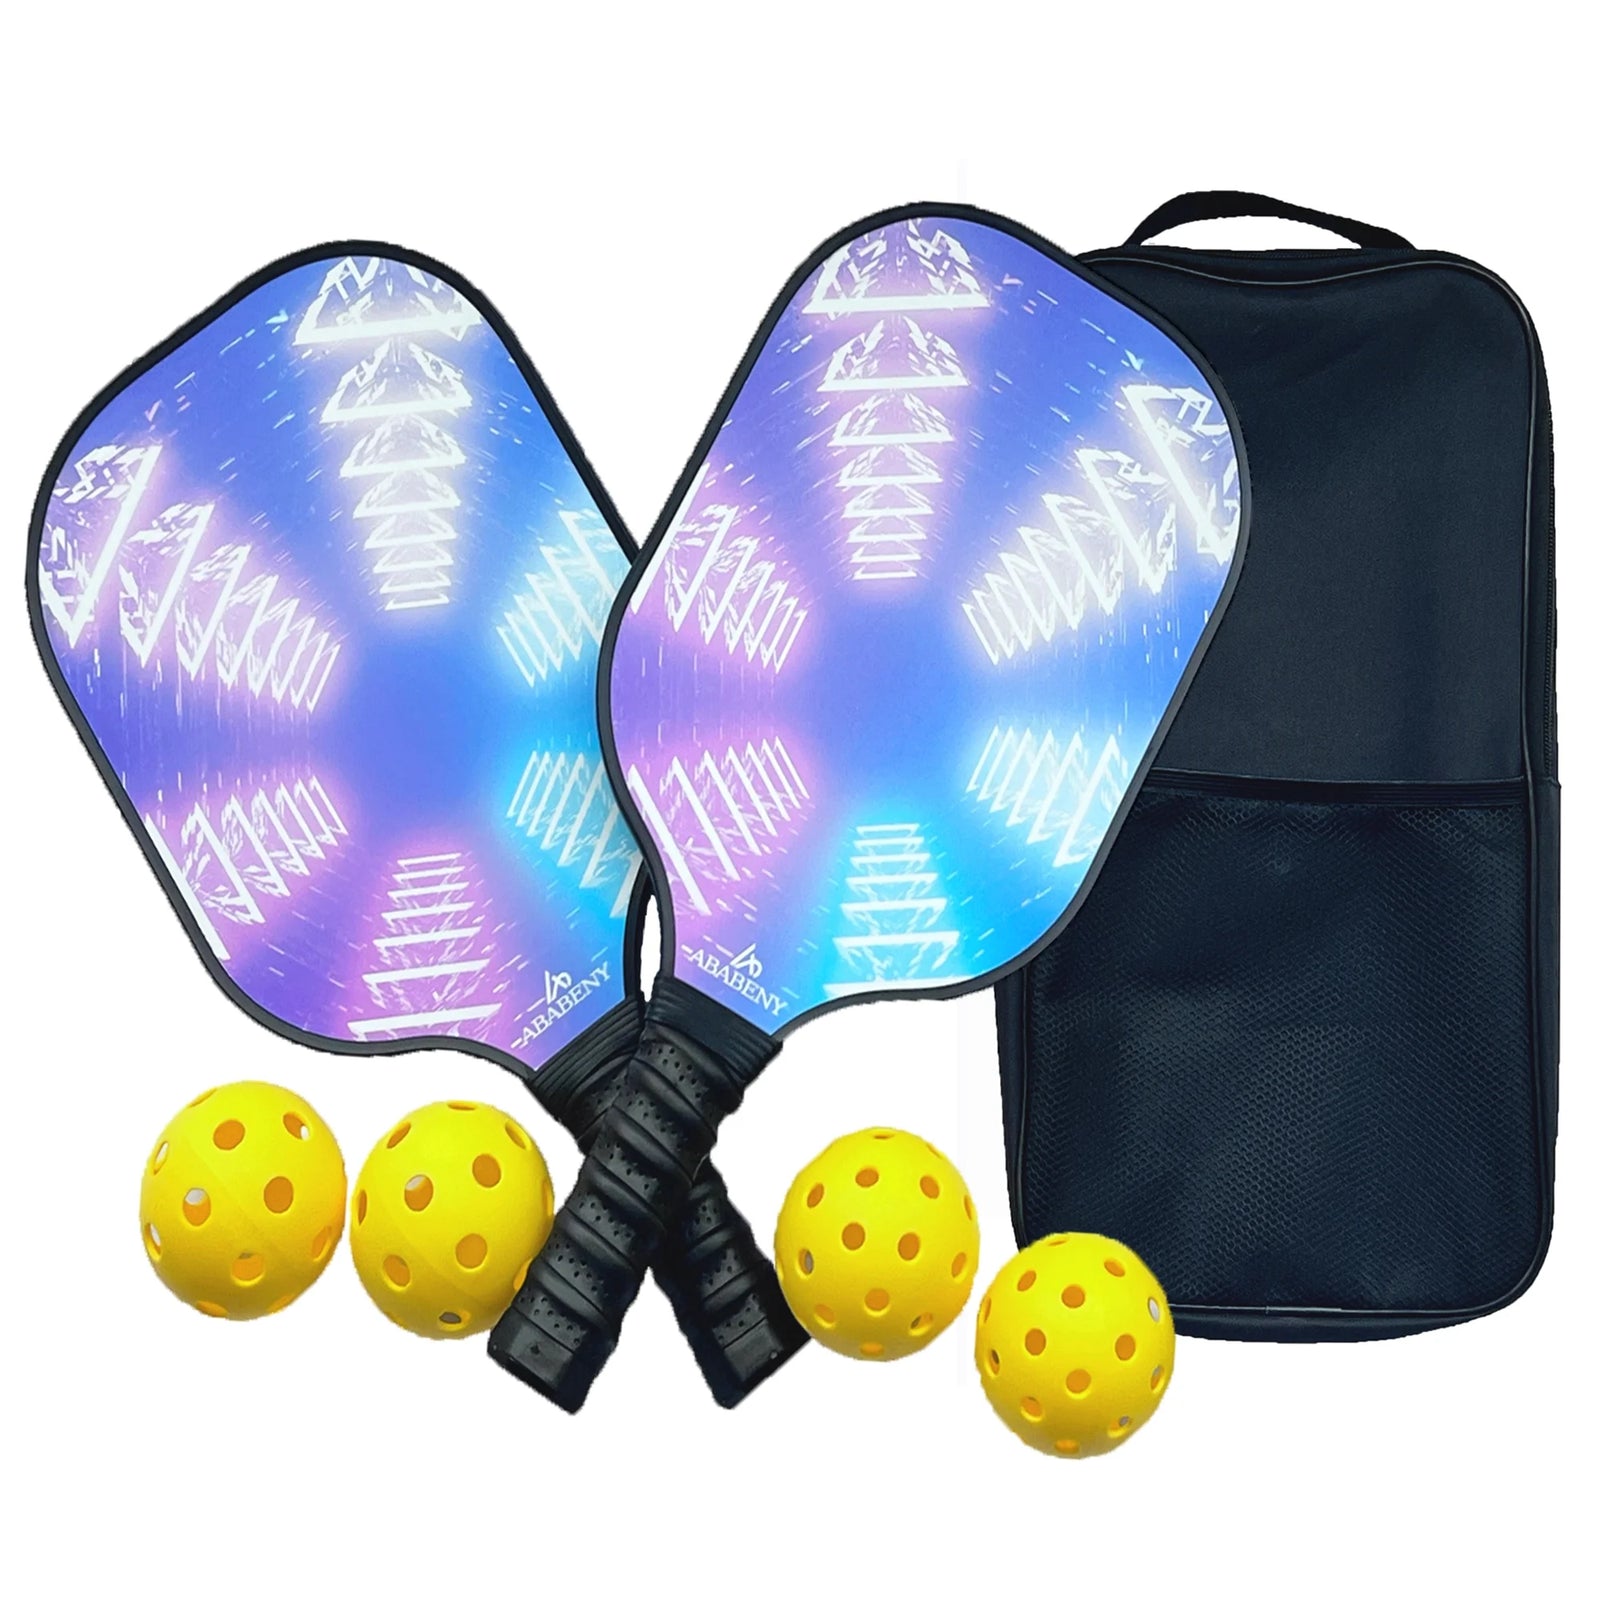 Pickleball Paddles Set of 2, USAPA Approved Fiberglass Surface Pickleball Set with Pickleball Rackets, Lightweighted Pickle Ball Paddle Set ​For Men Women with 4 Pickle Balls, Carrying Bag